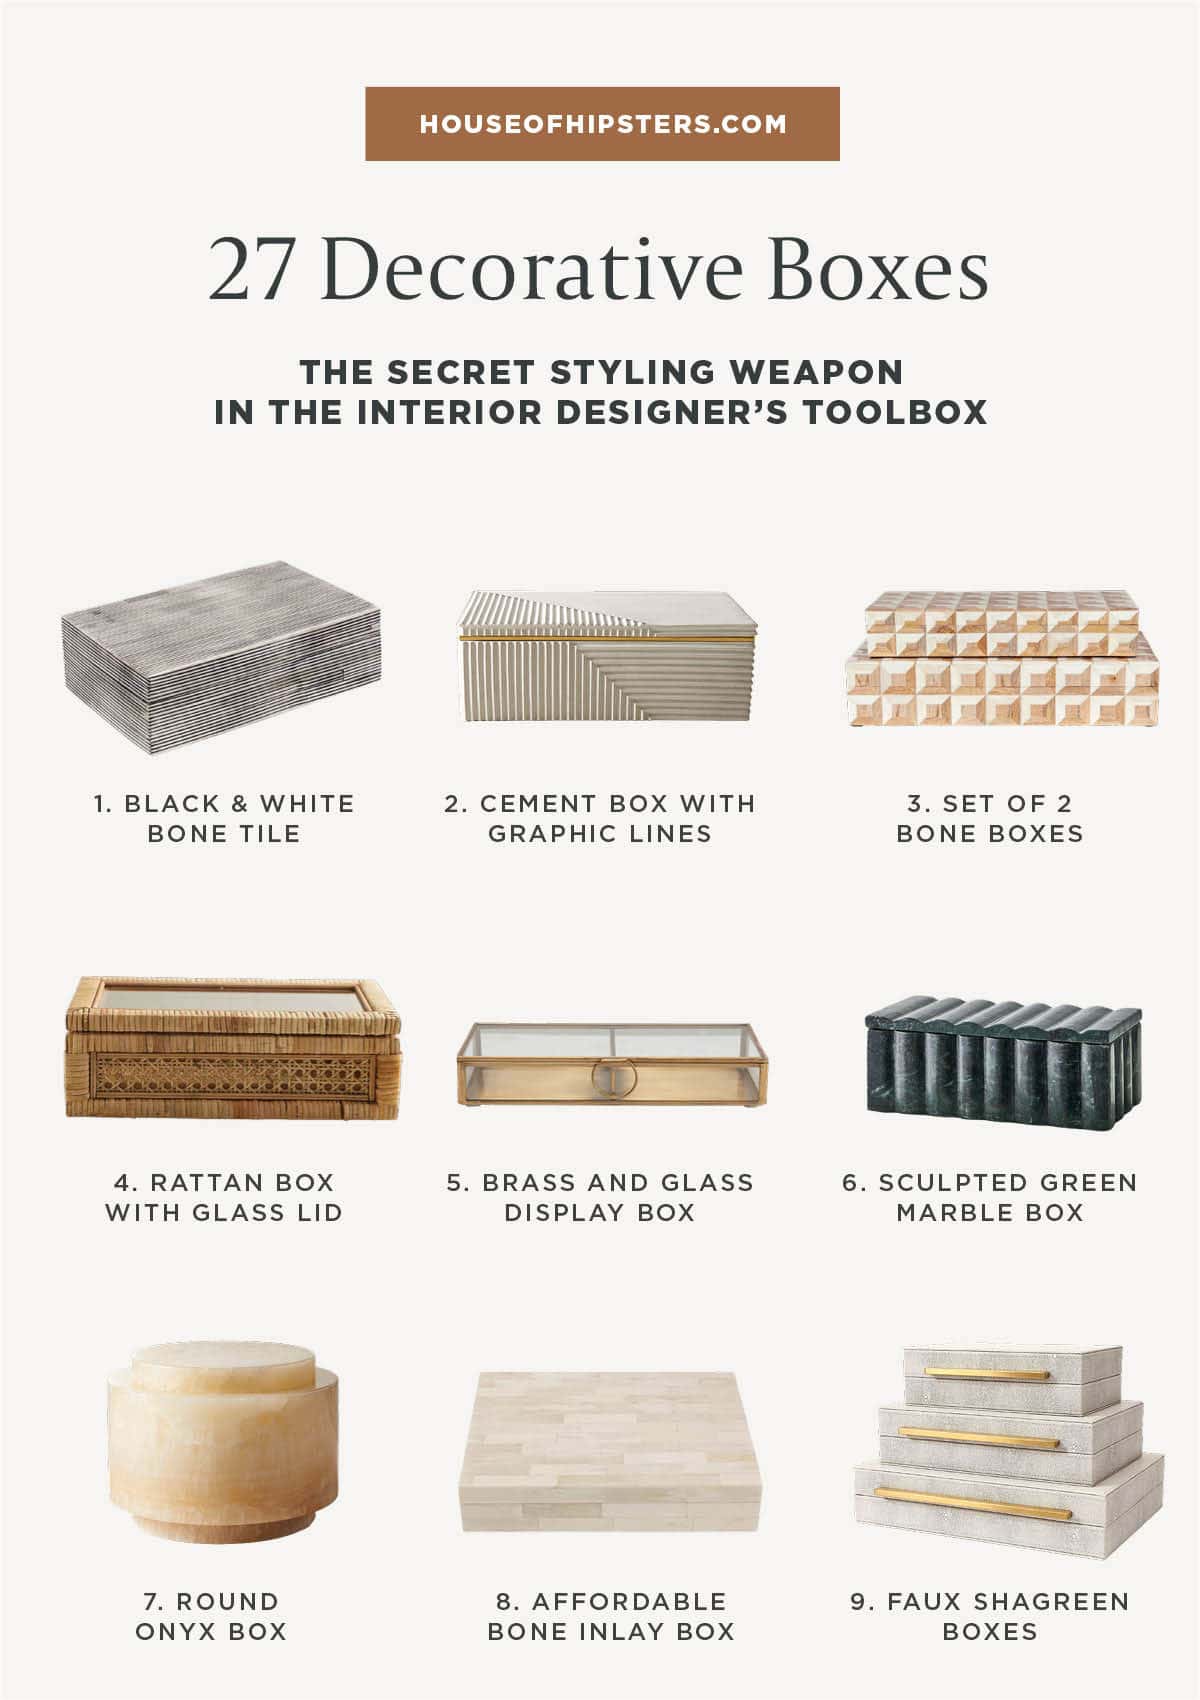 27 Decorative Boxes Your Inner Decorator Will Love - House Of Hipsters